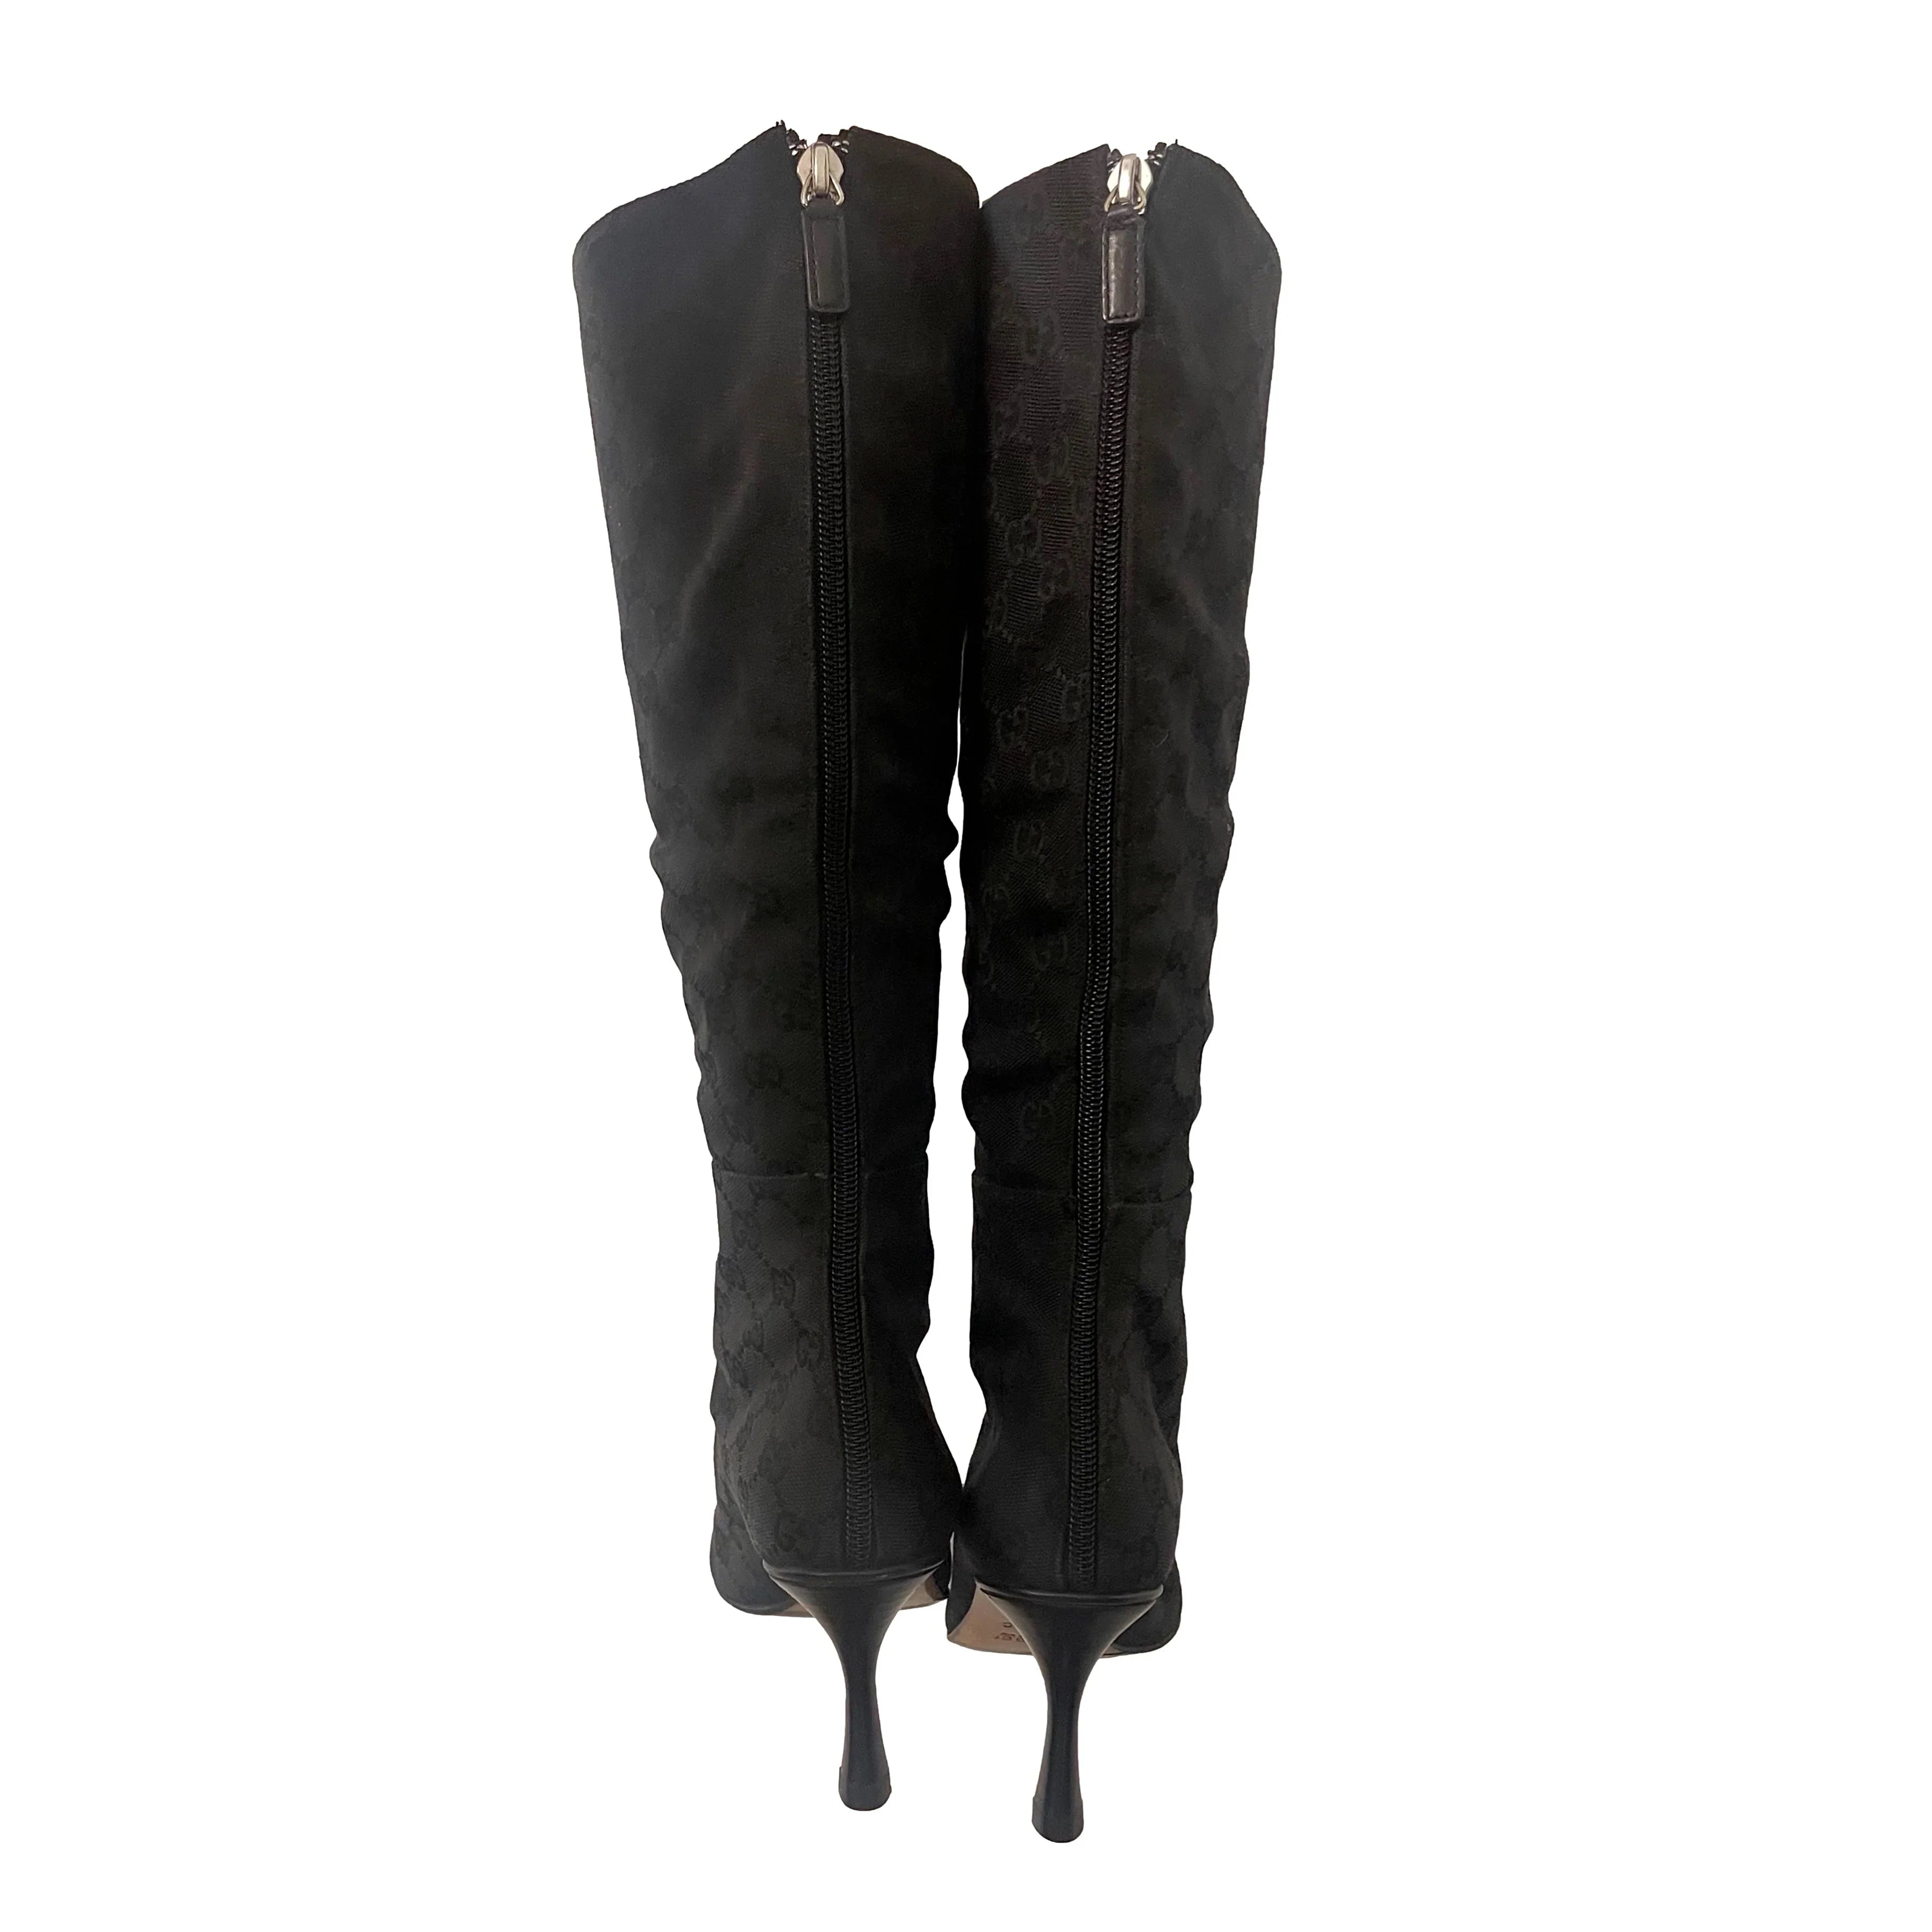 Gucci Black Monogram Knee-High Boots - Shoes